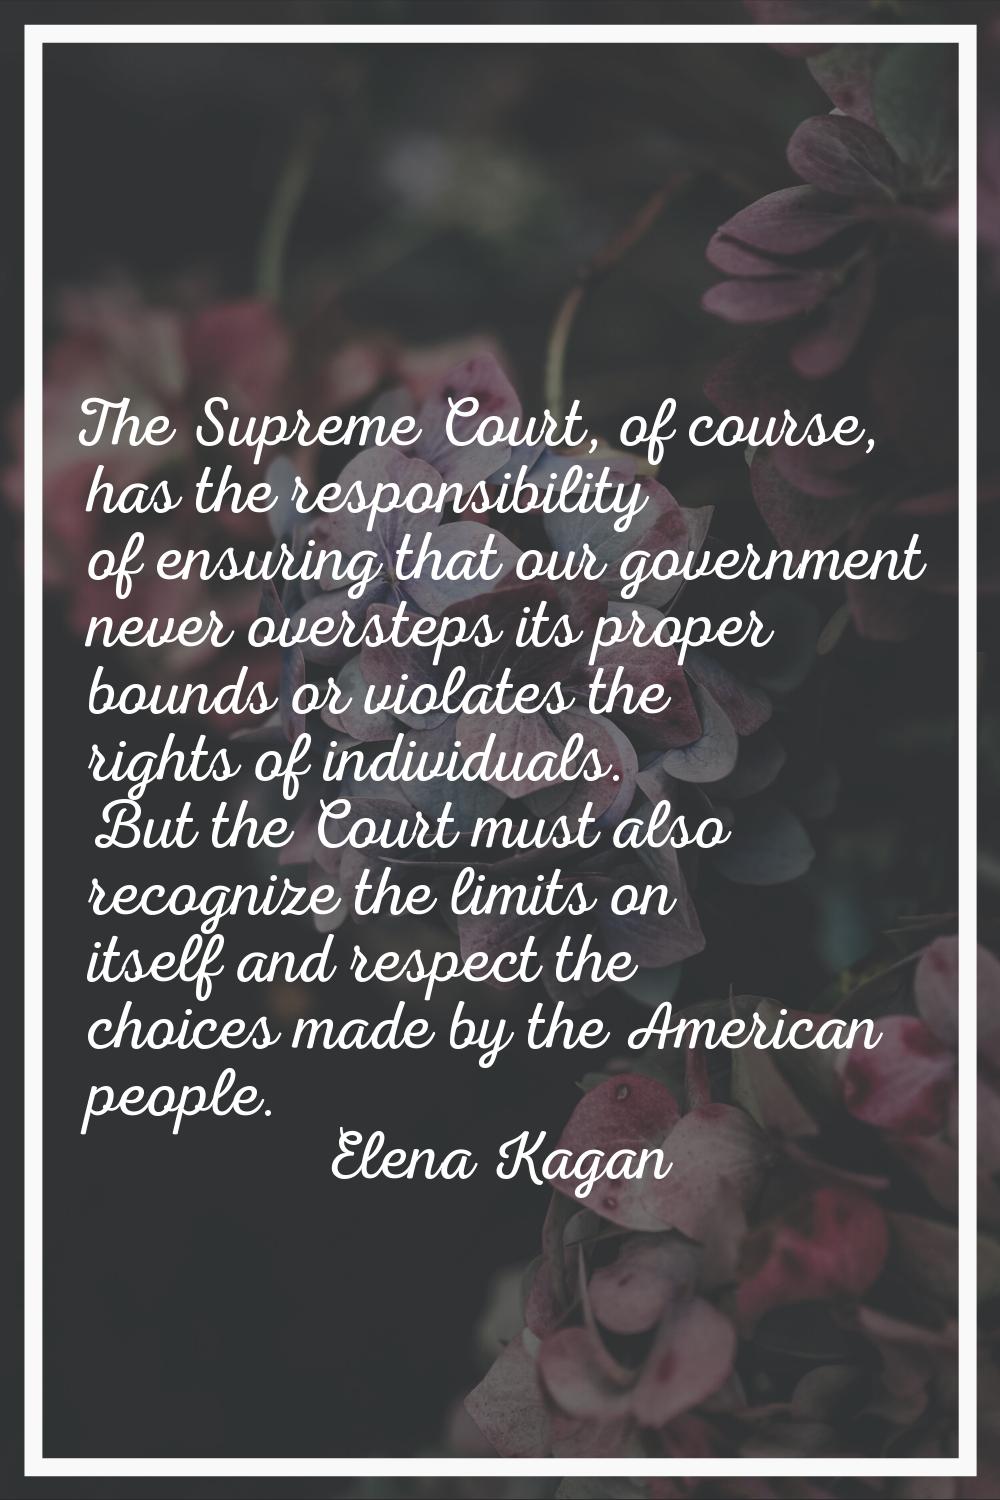 The Supreme Court, of course, has the responsibility of ensuring that our government never overstep